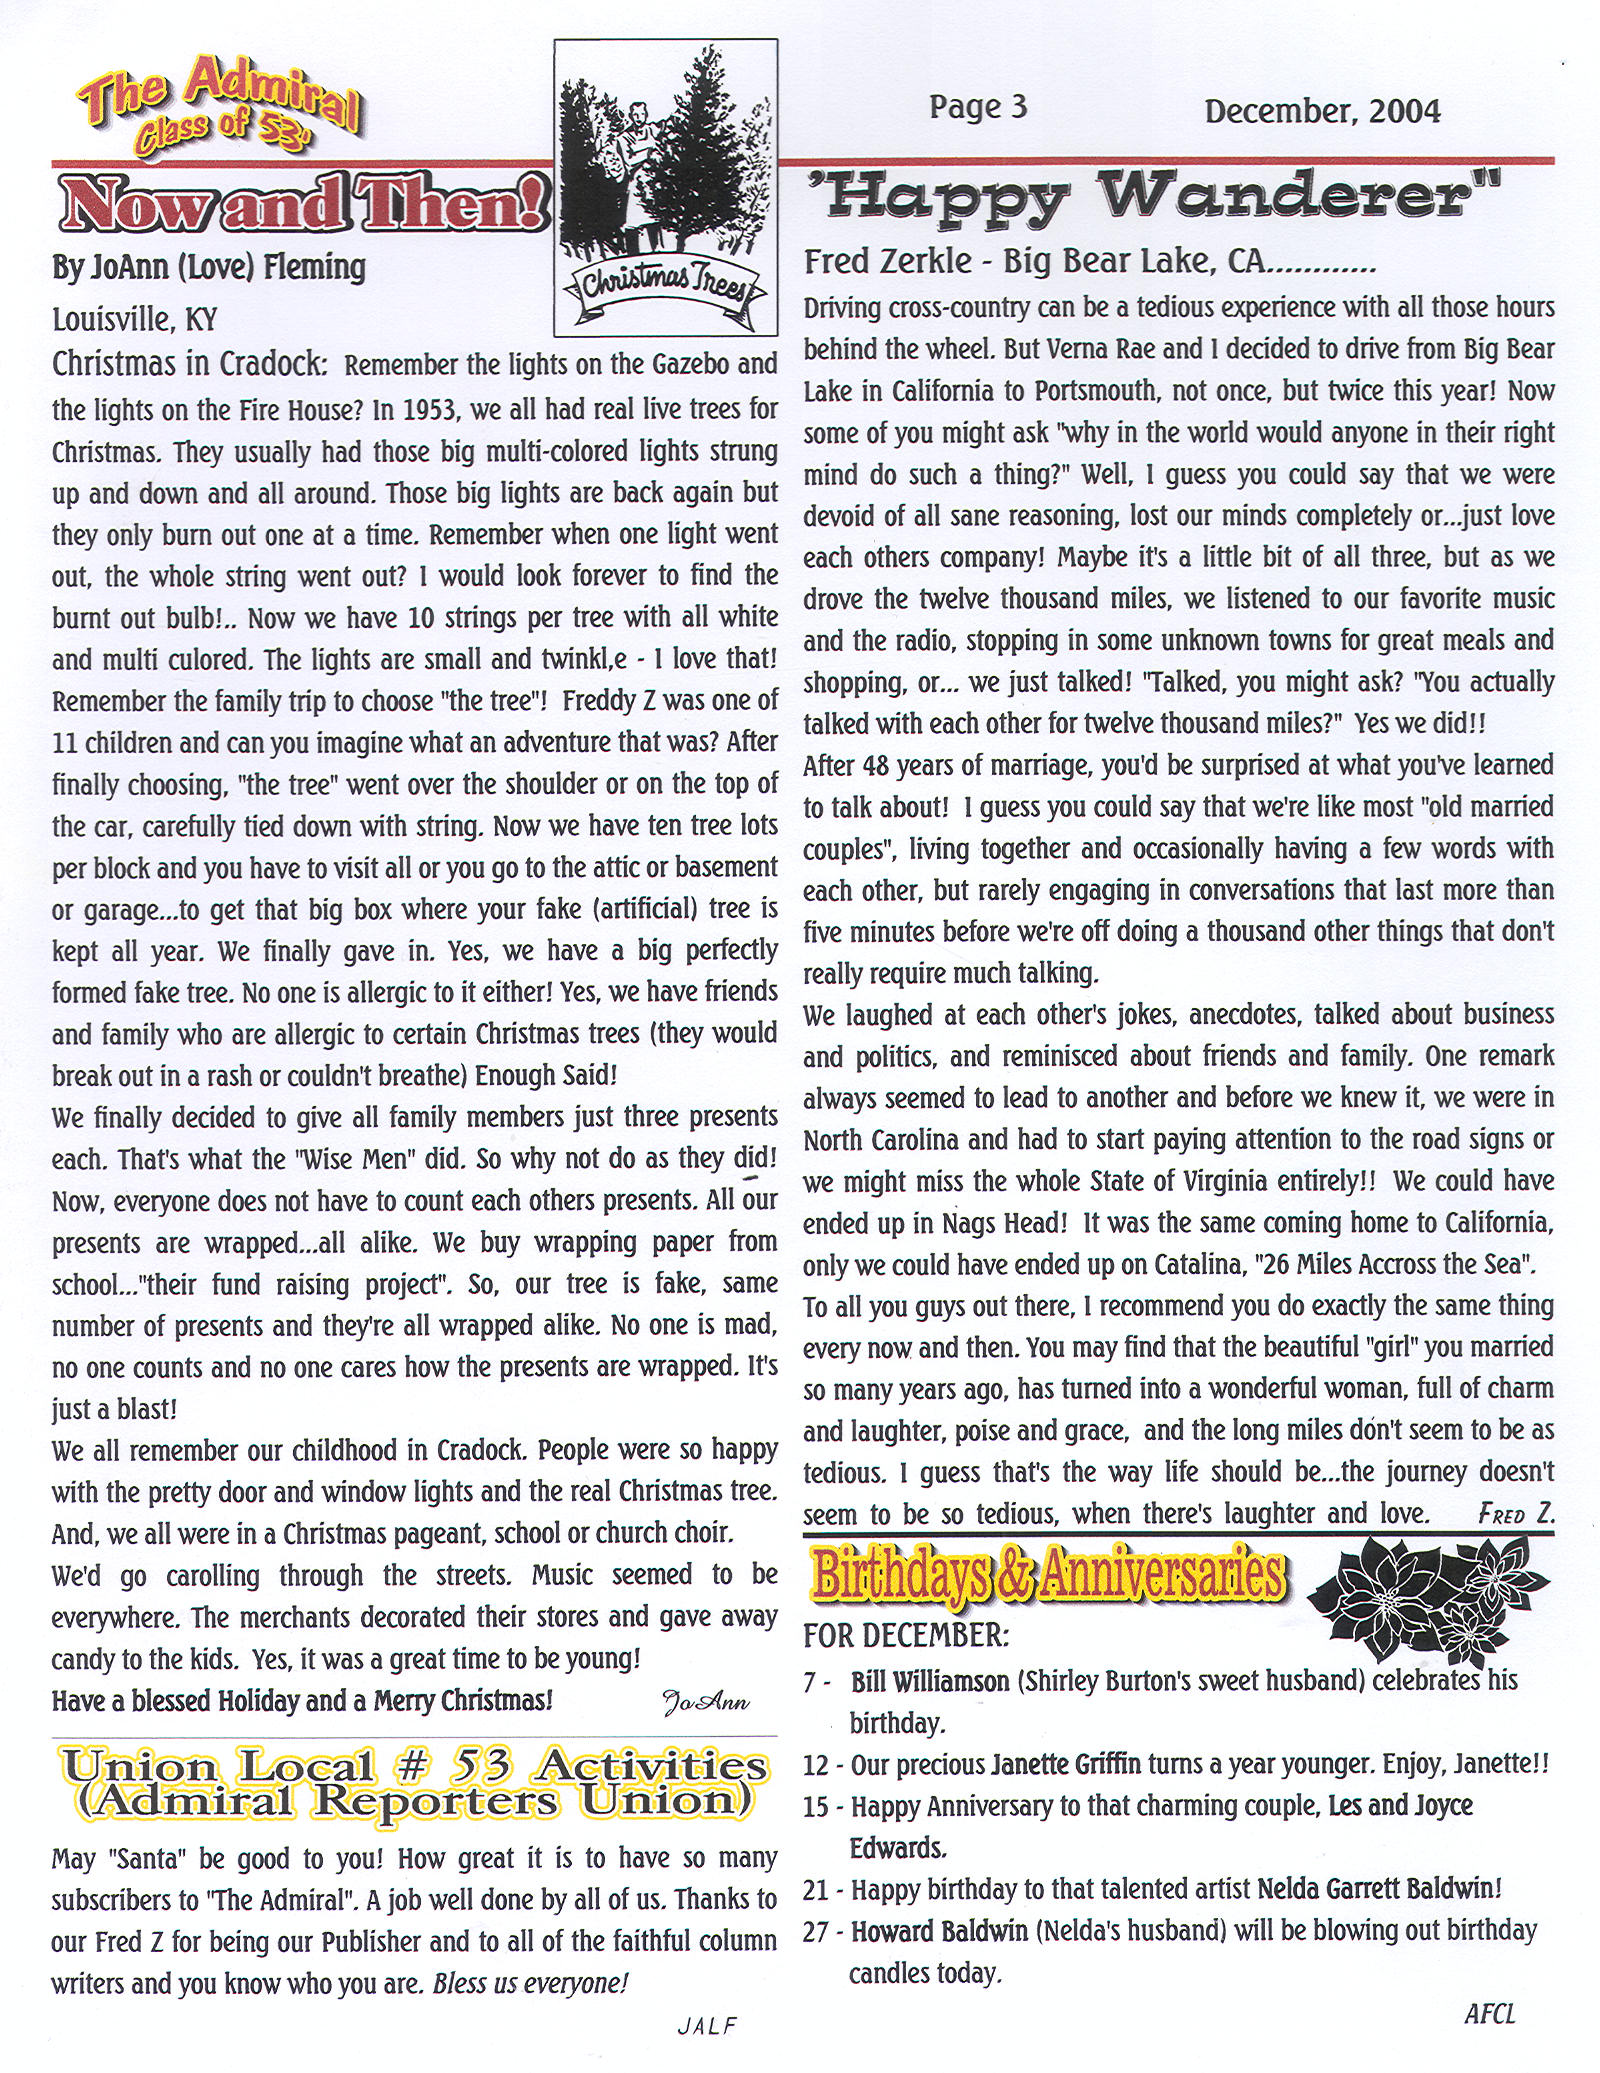 The Admiral - December 2004 - pg. 3